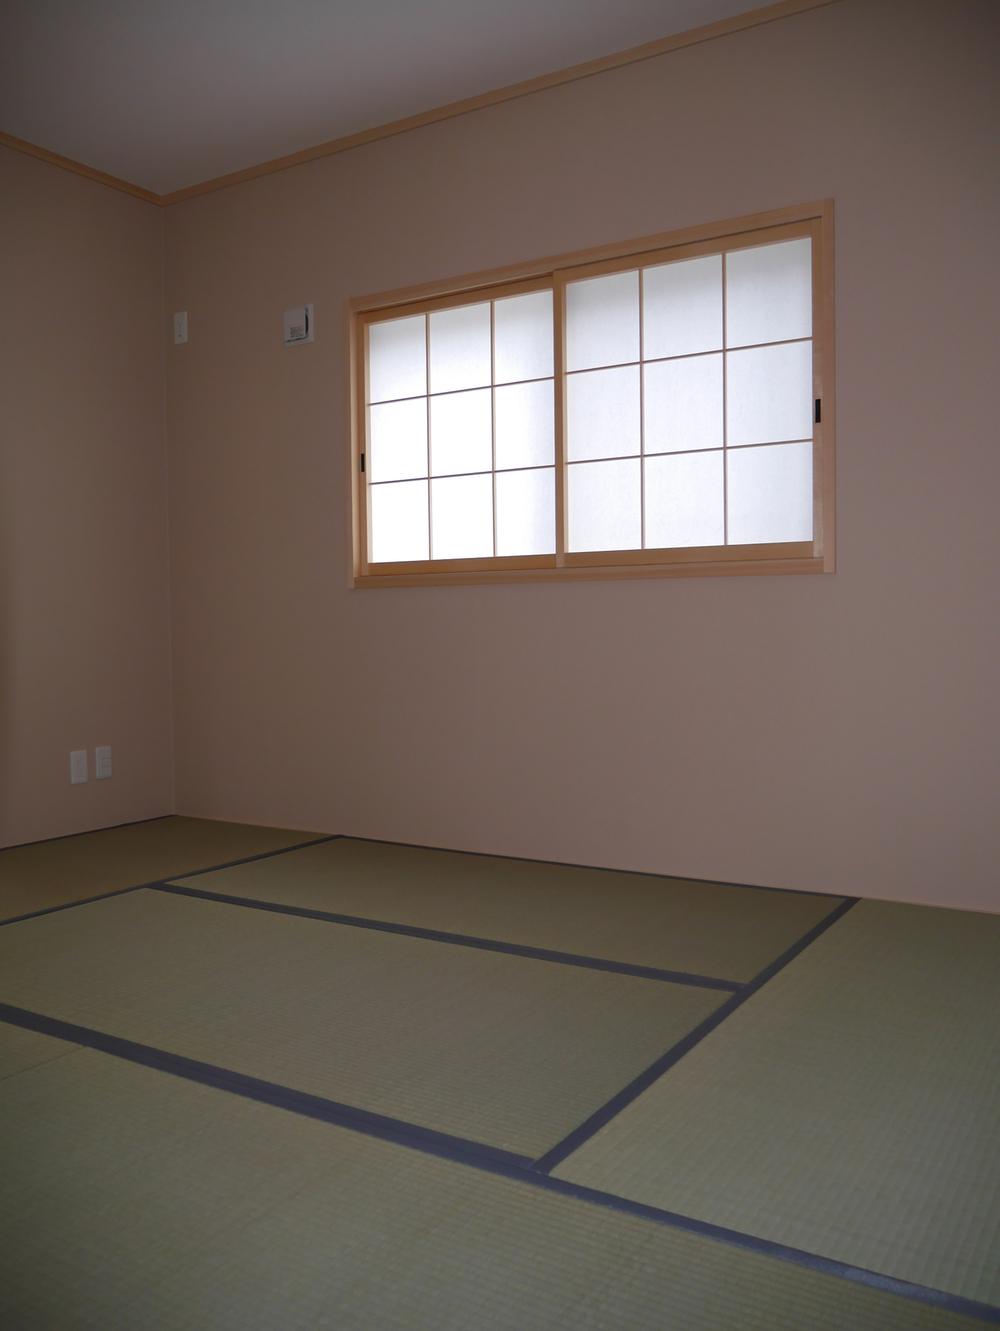 Non-living room. It will be healed to the smell of tatami